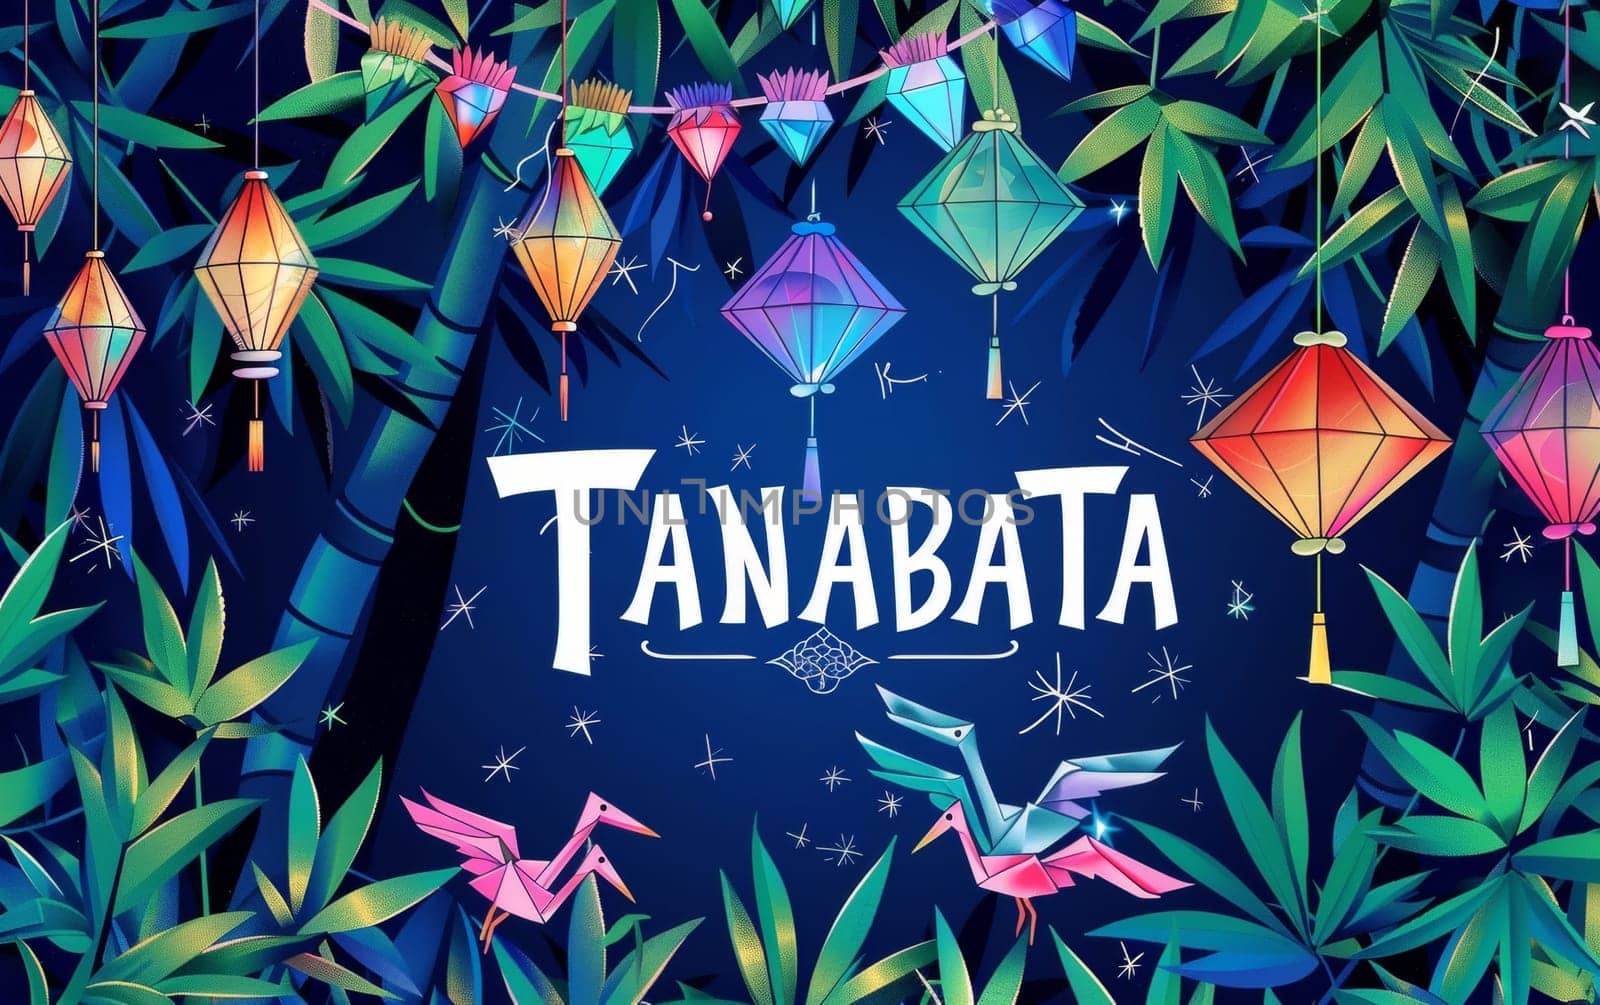 Vibrant Tanabata festival graphic with colorful paper lanterns, origami cranes, and bamboo on a star-filled night sky backdrop